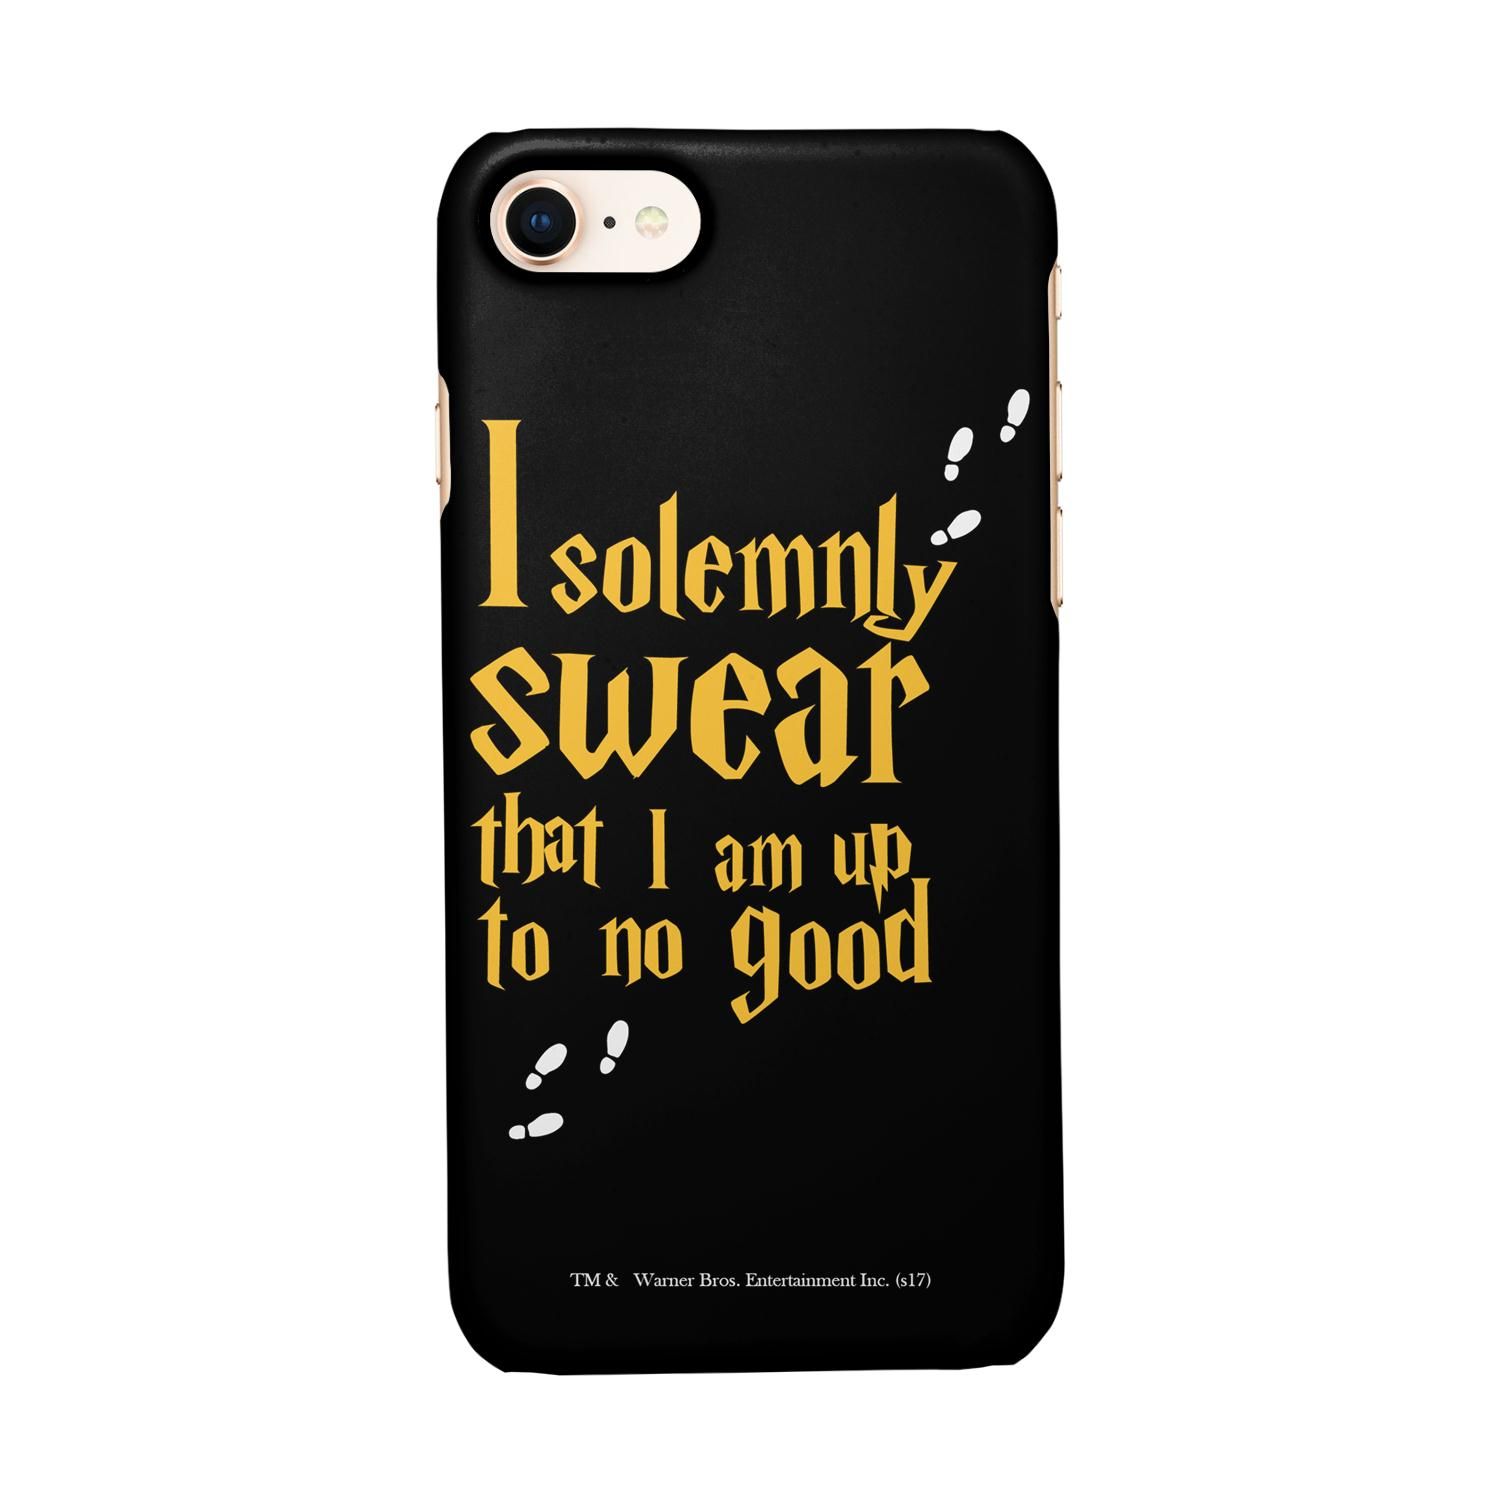 Buy Solemnly Swear - Sleek Phone Case for iPhone 7 Online